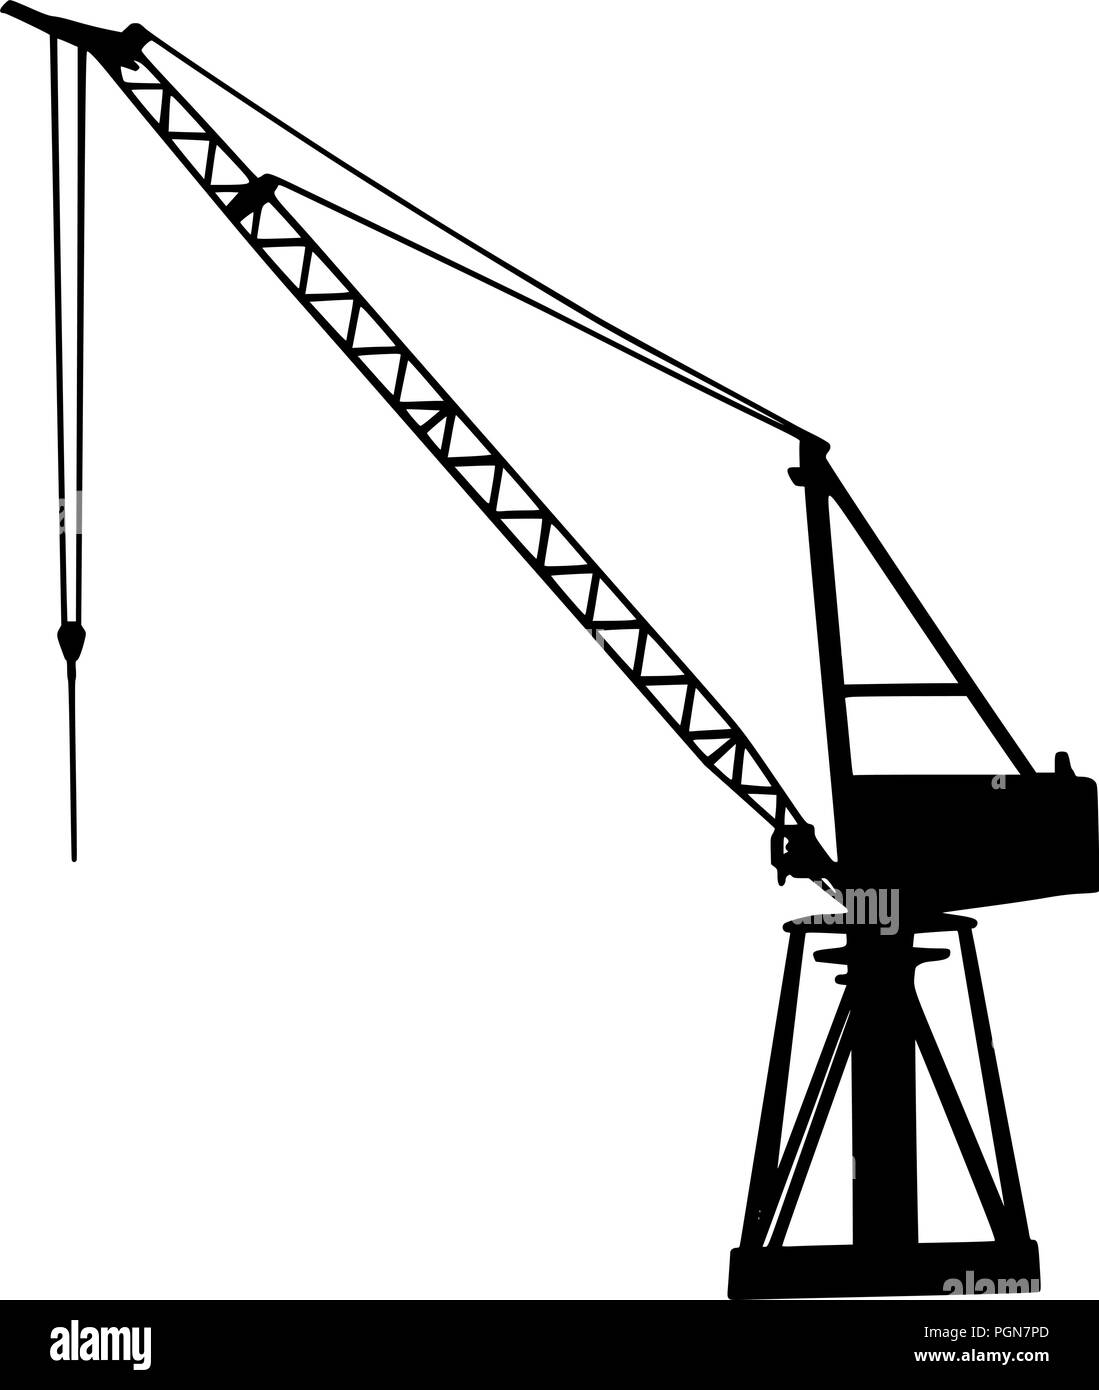 Crane vector graphic in black and white Stock Vector